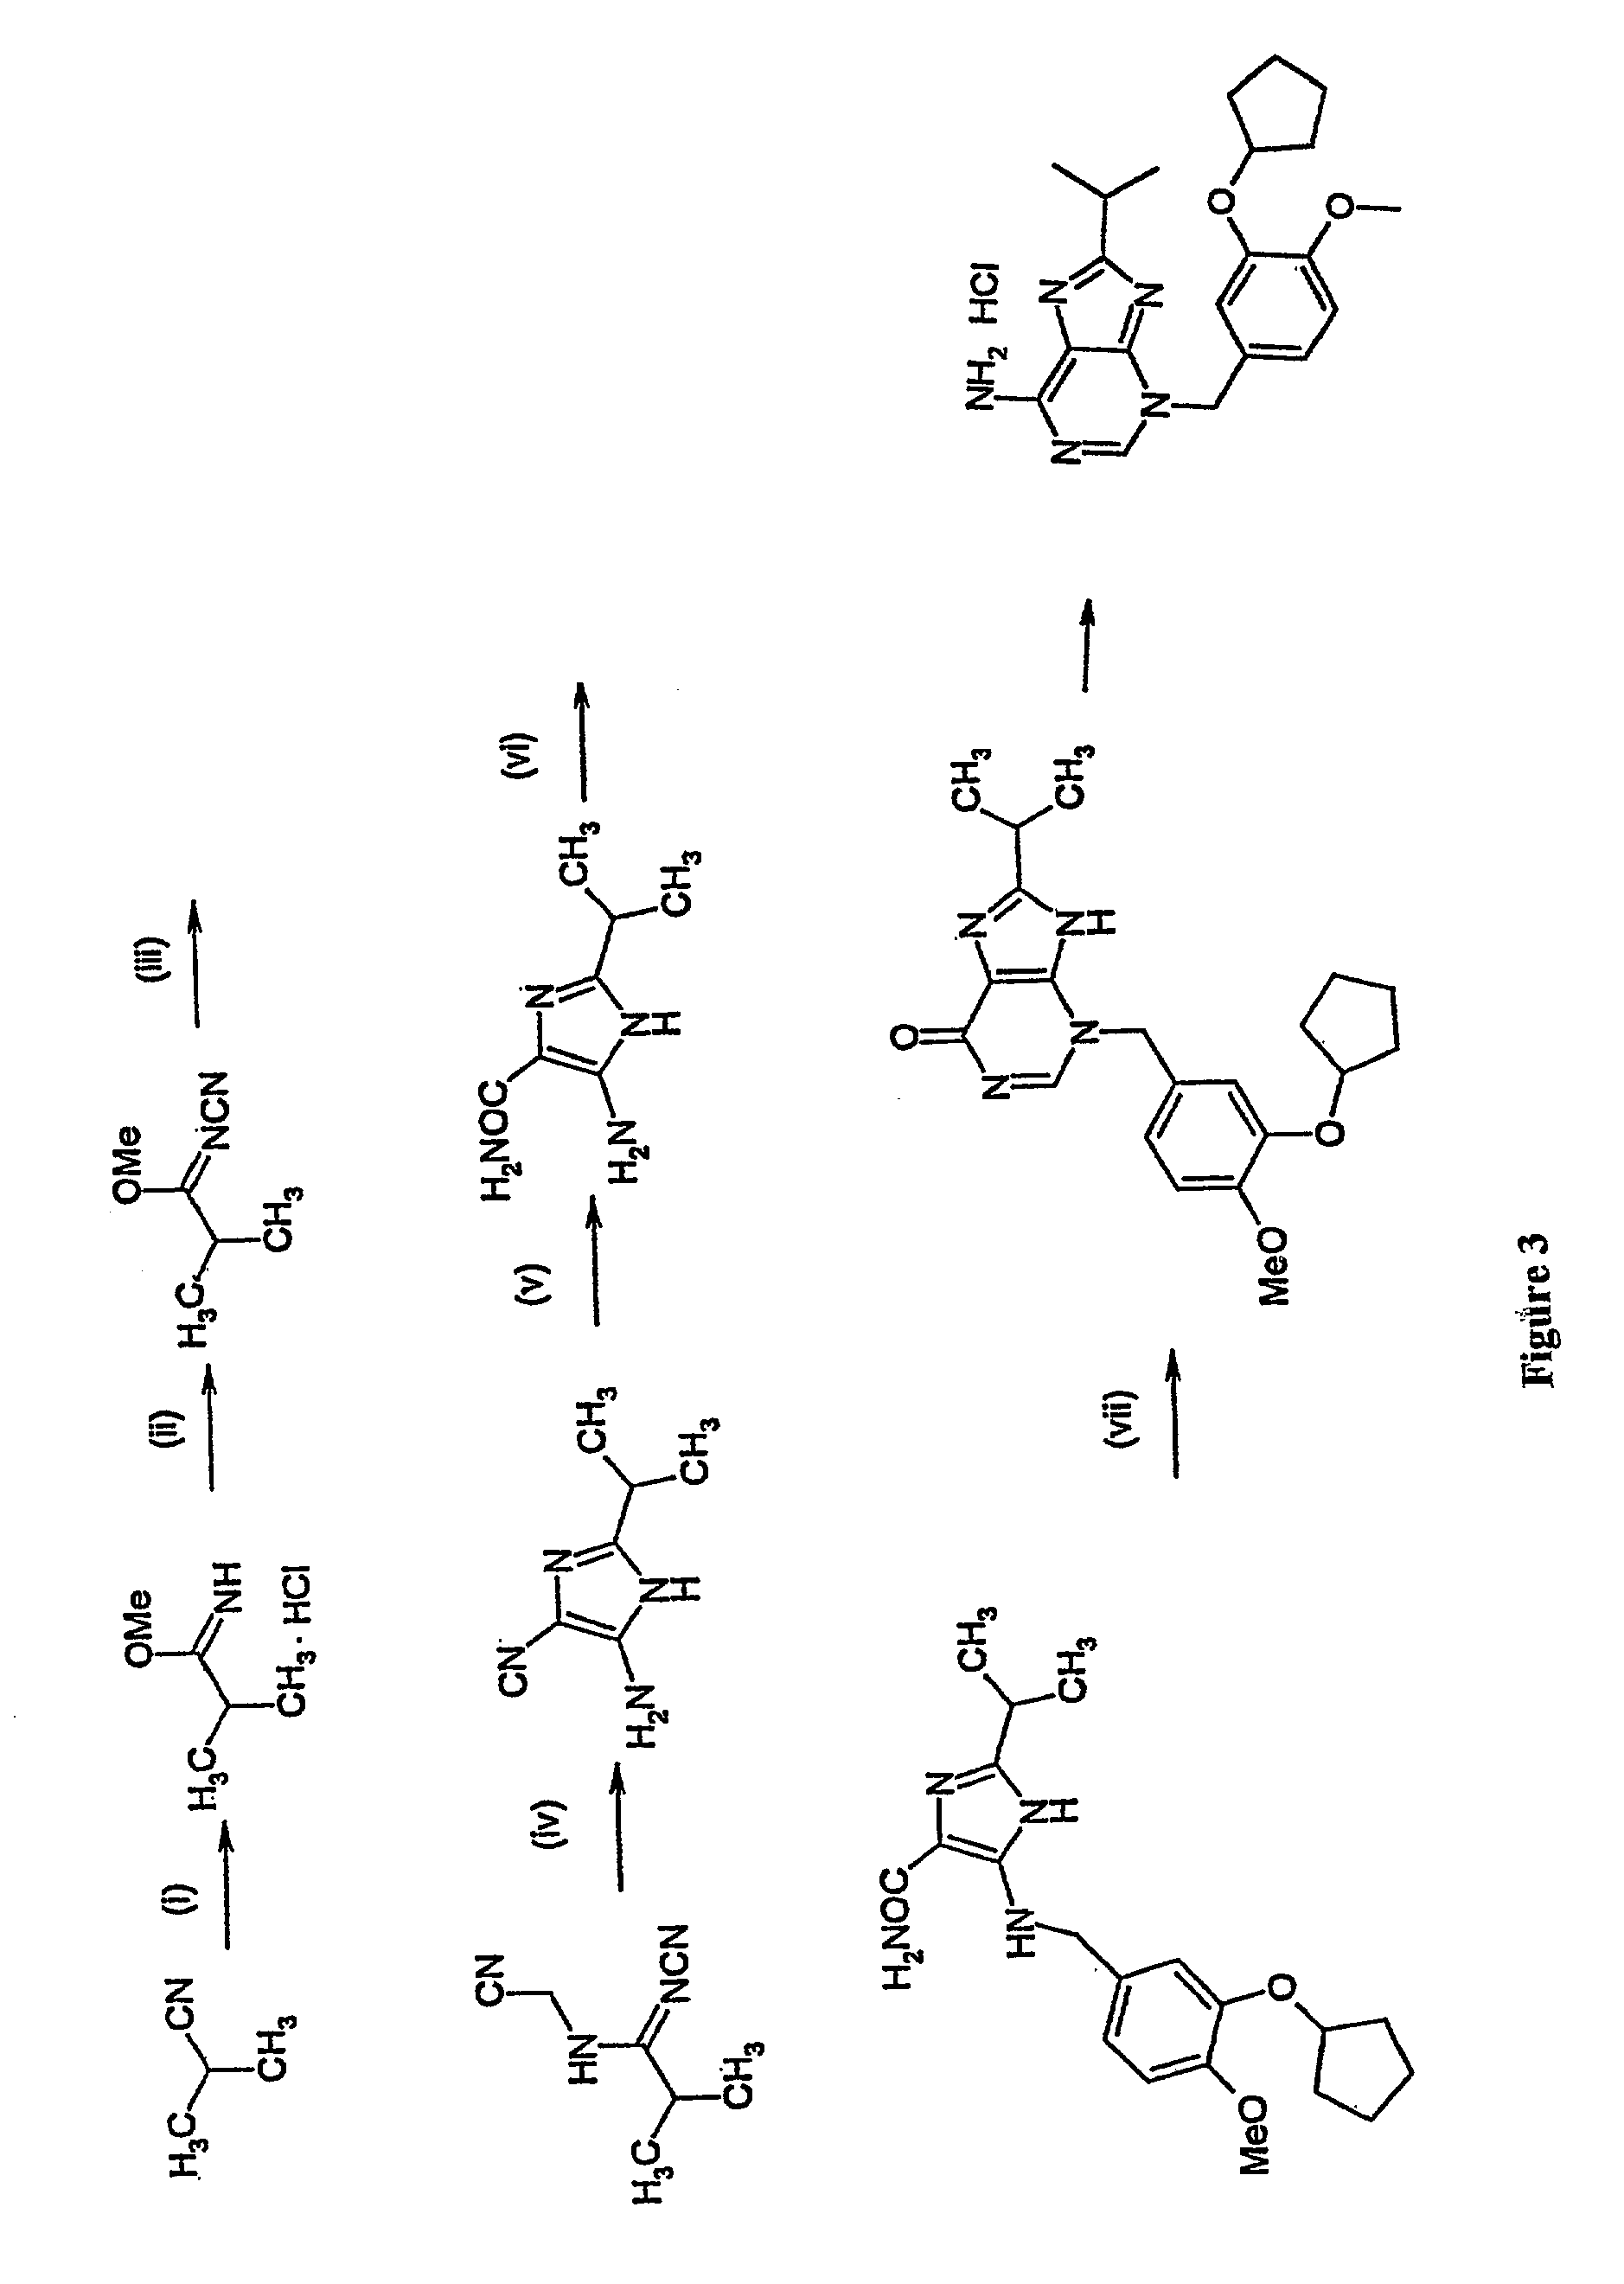 Method of defining genus of chemical compound and method of designing molecules